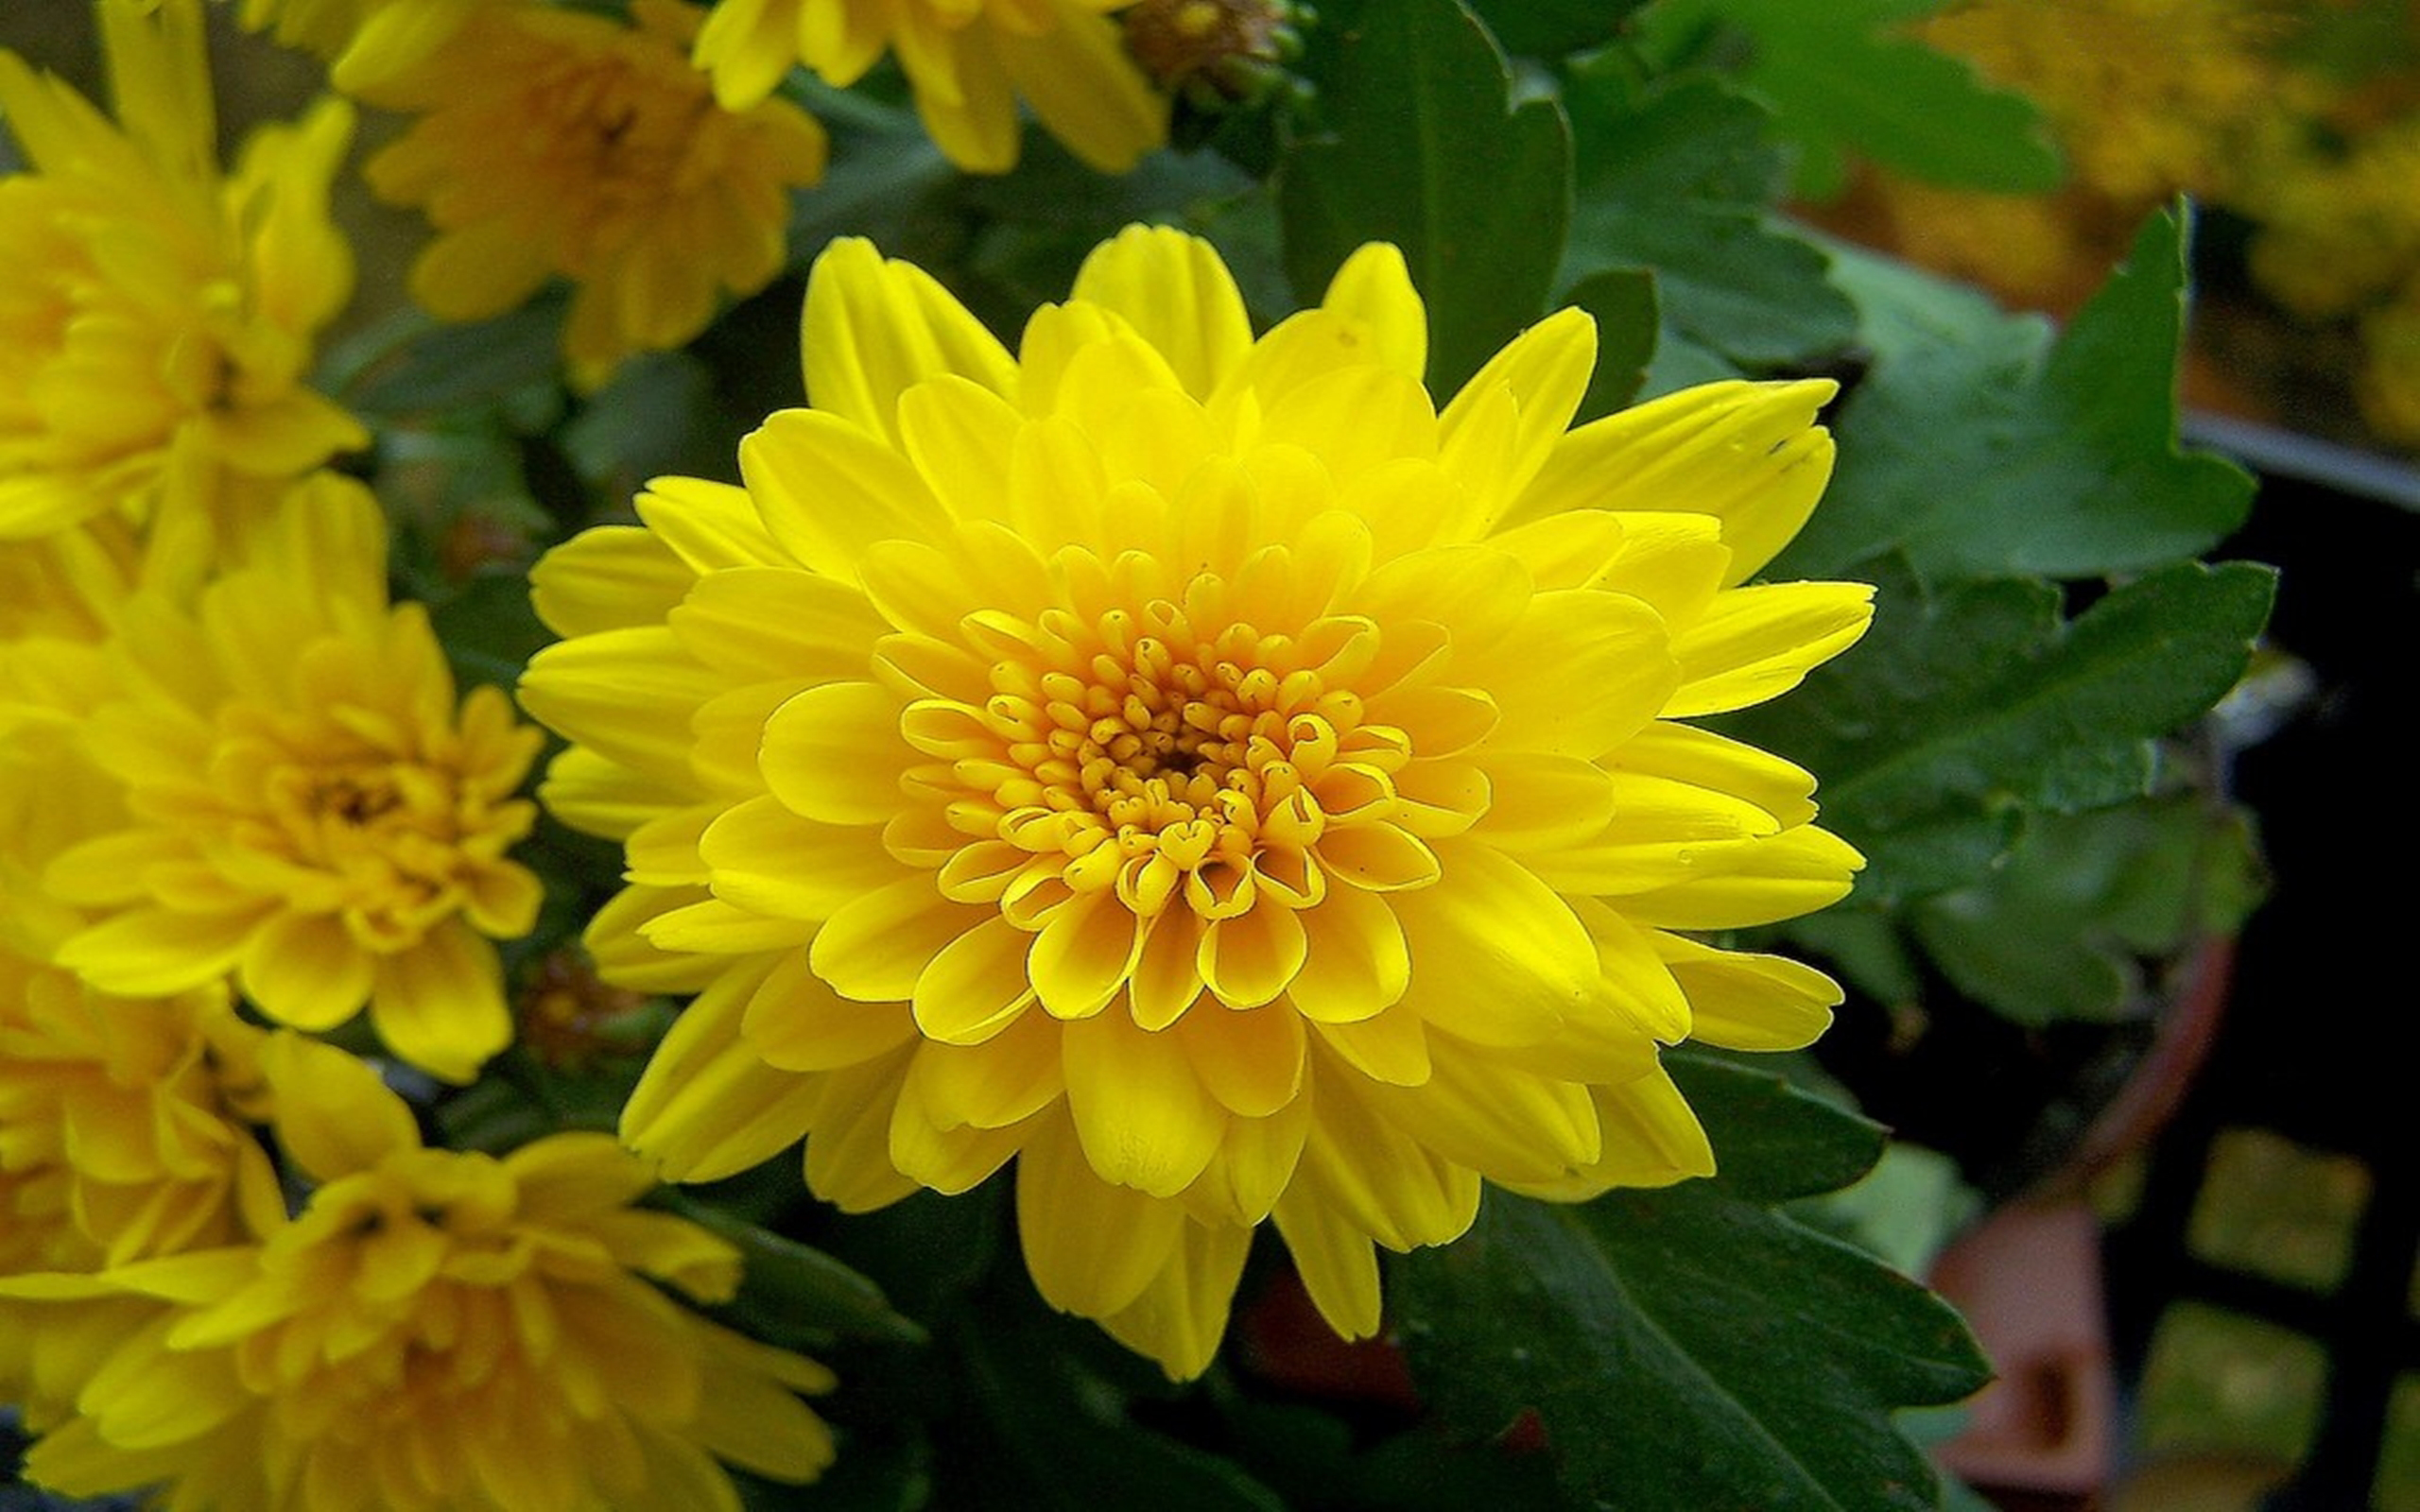 Chrysanthemum Yellow Blossom Flowers Images : Wallpapers13.com